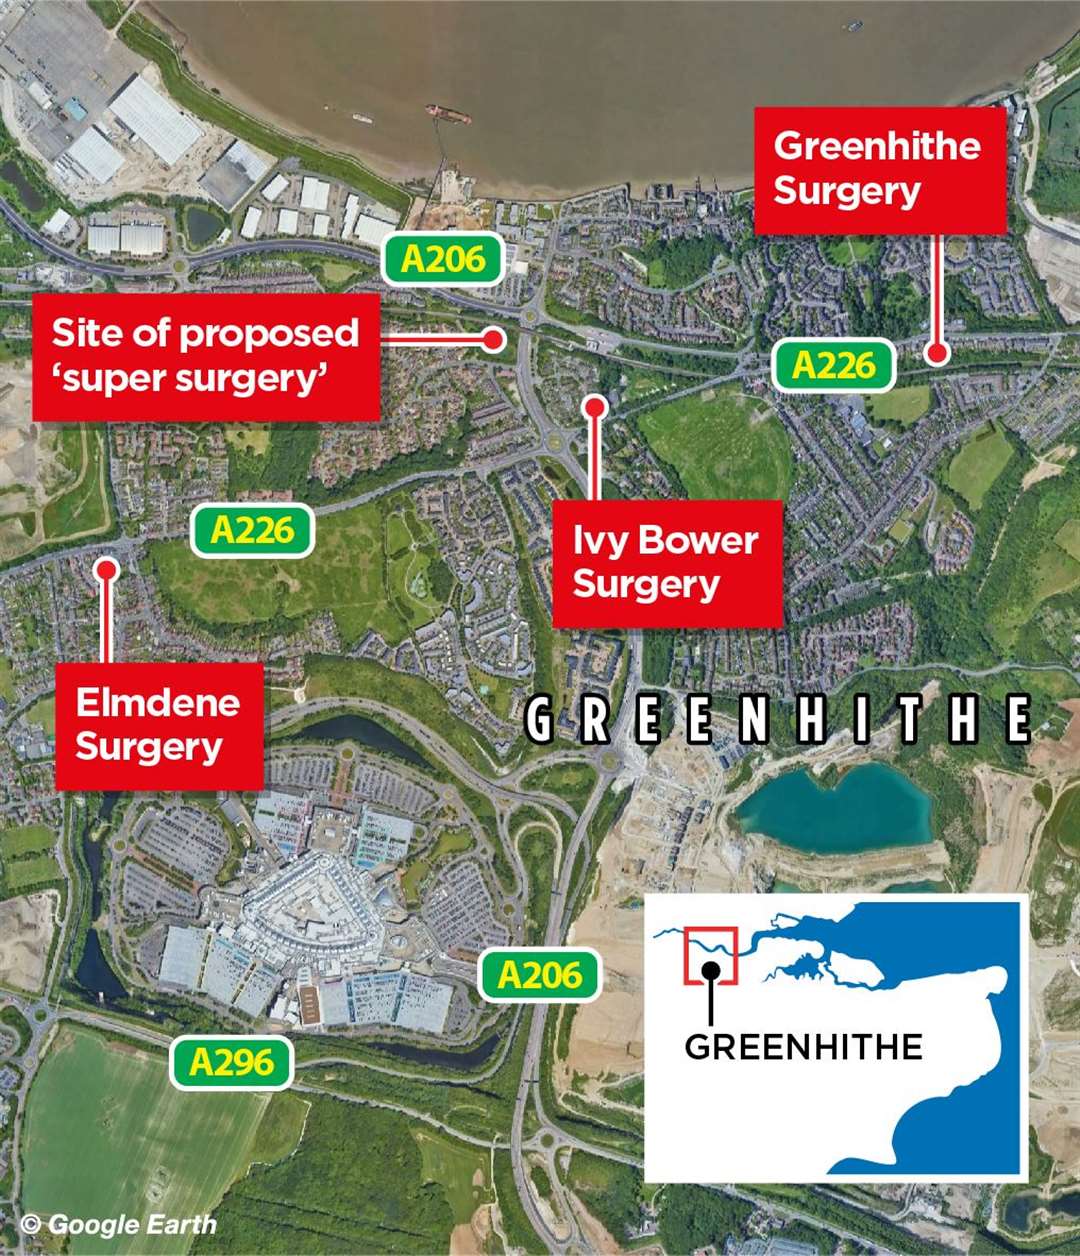 Where the proposed Greenhithe surgery is and the three existing surgeries are